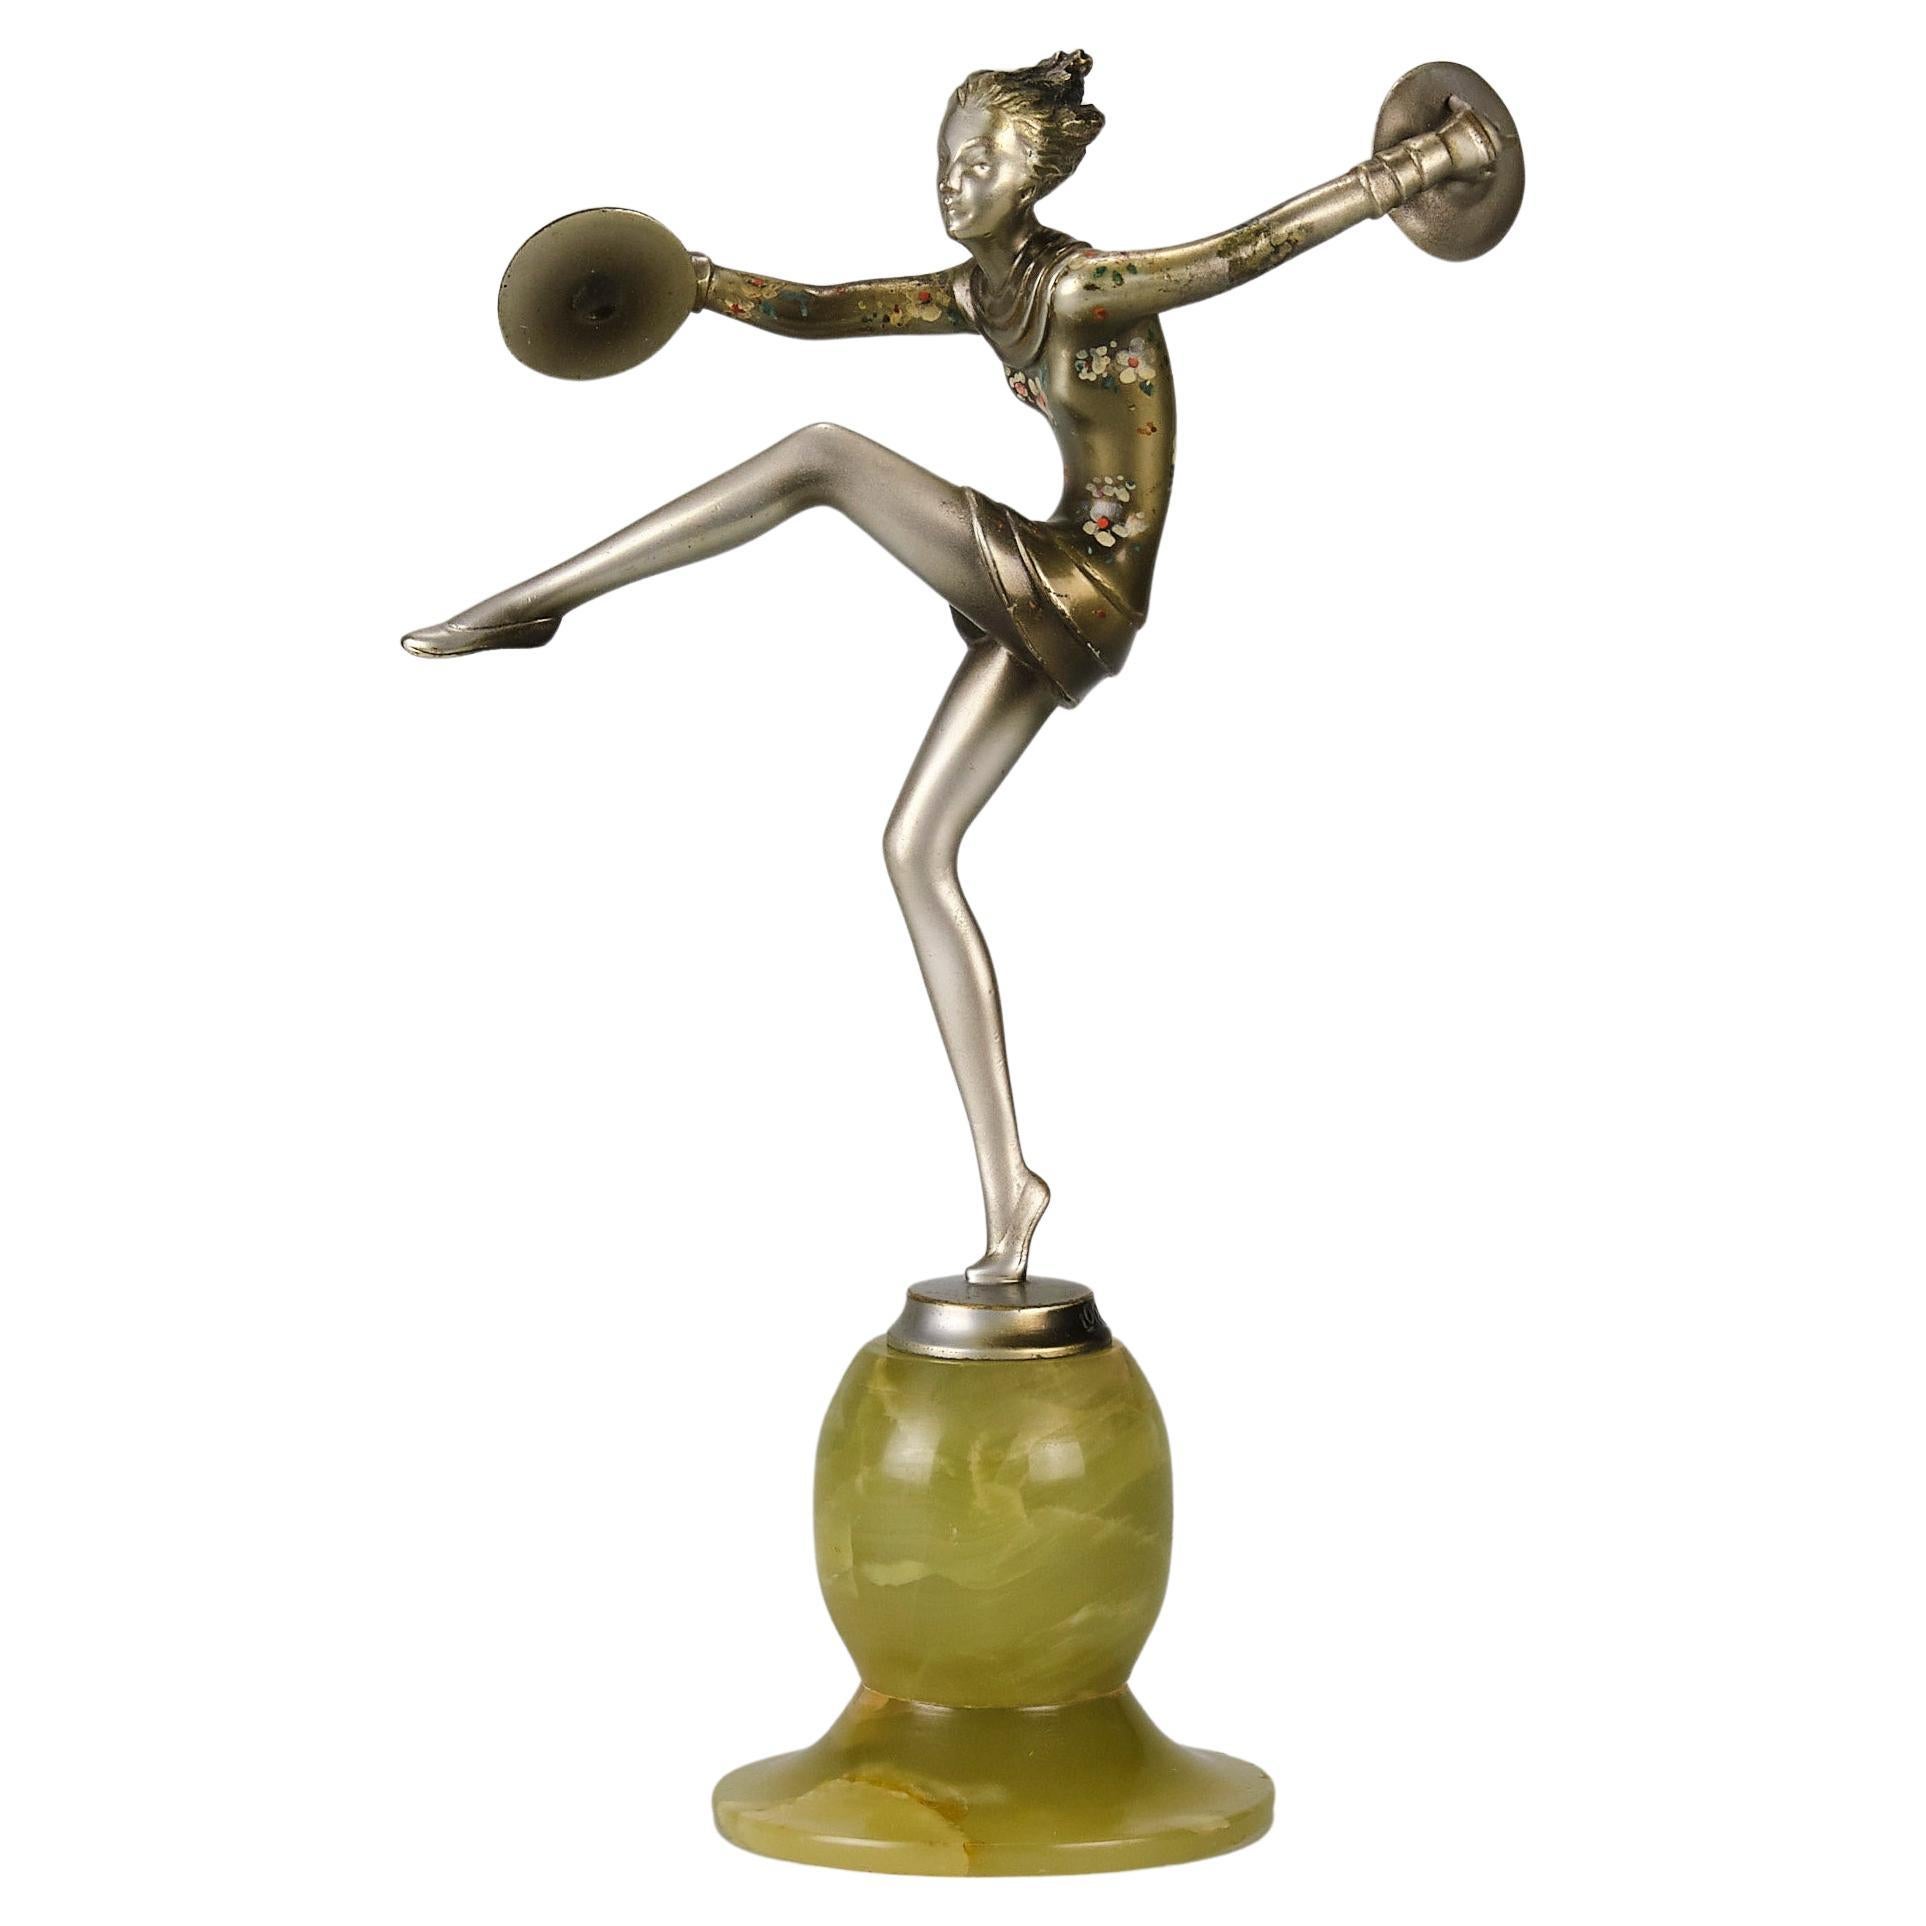 Early 20th Century Art Deco Bronze entitled "Cymbal Dancer" by Lorenzl & Crejo For Sale